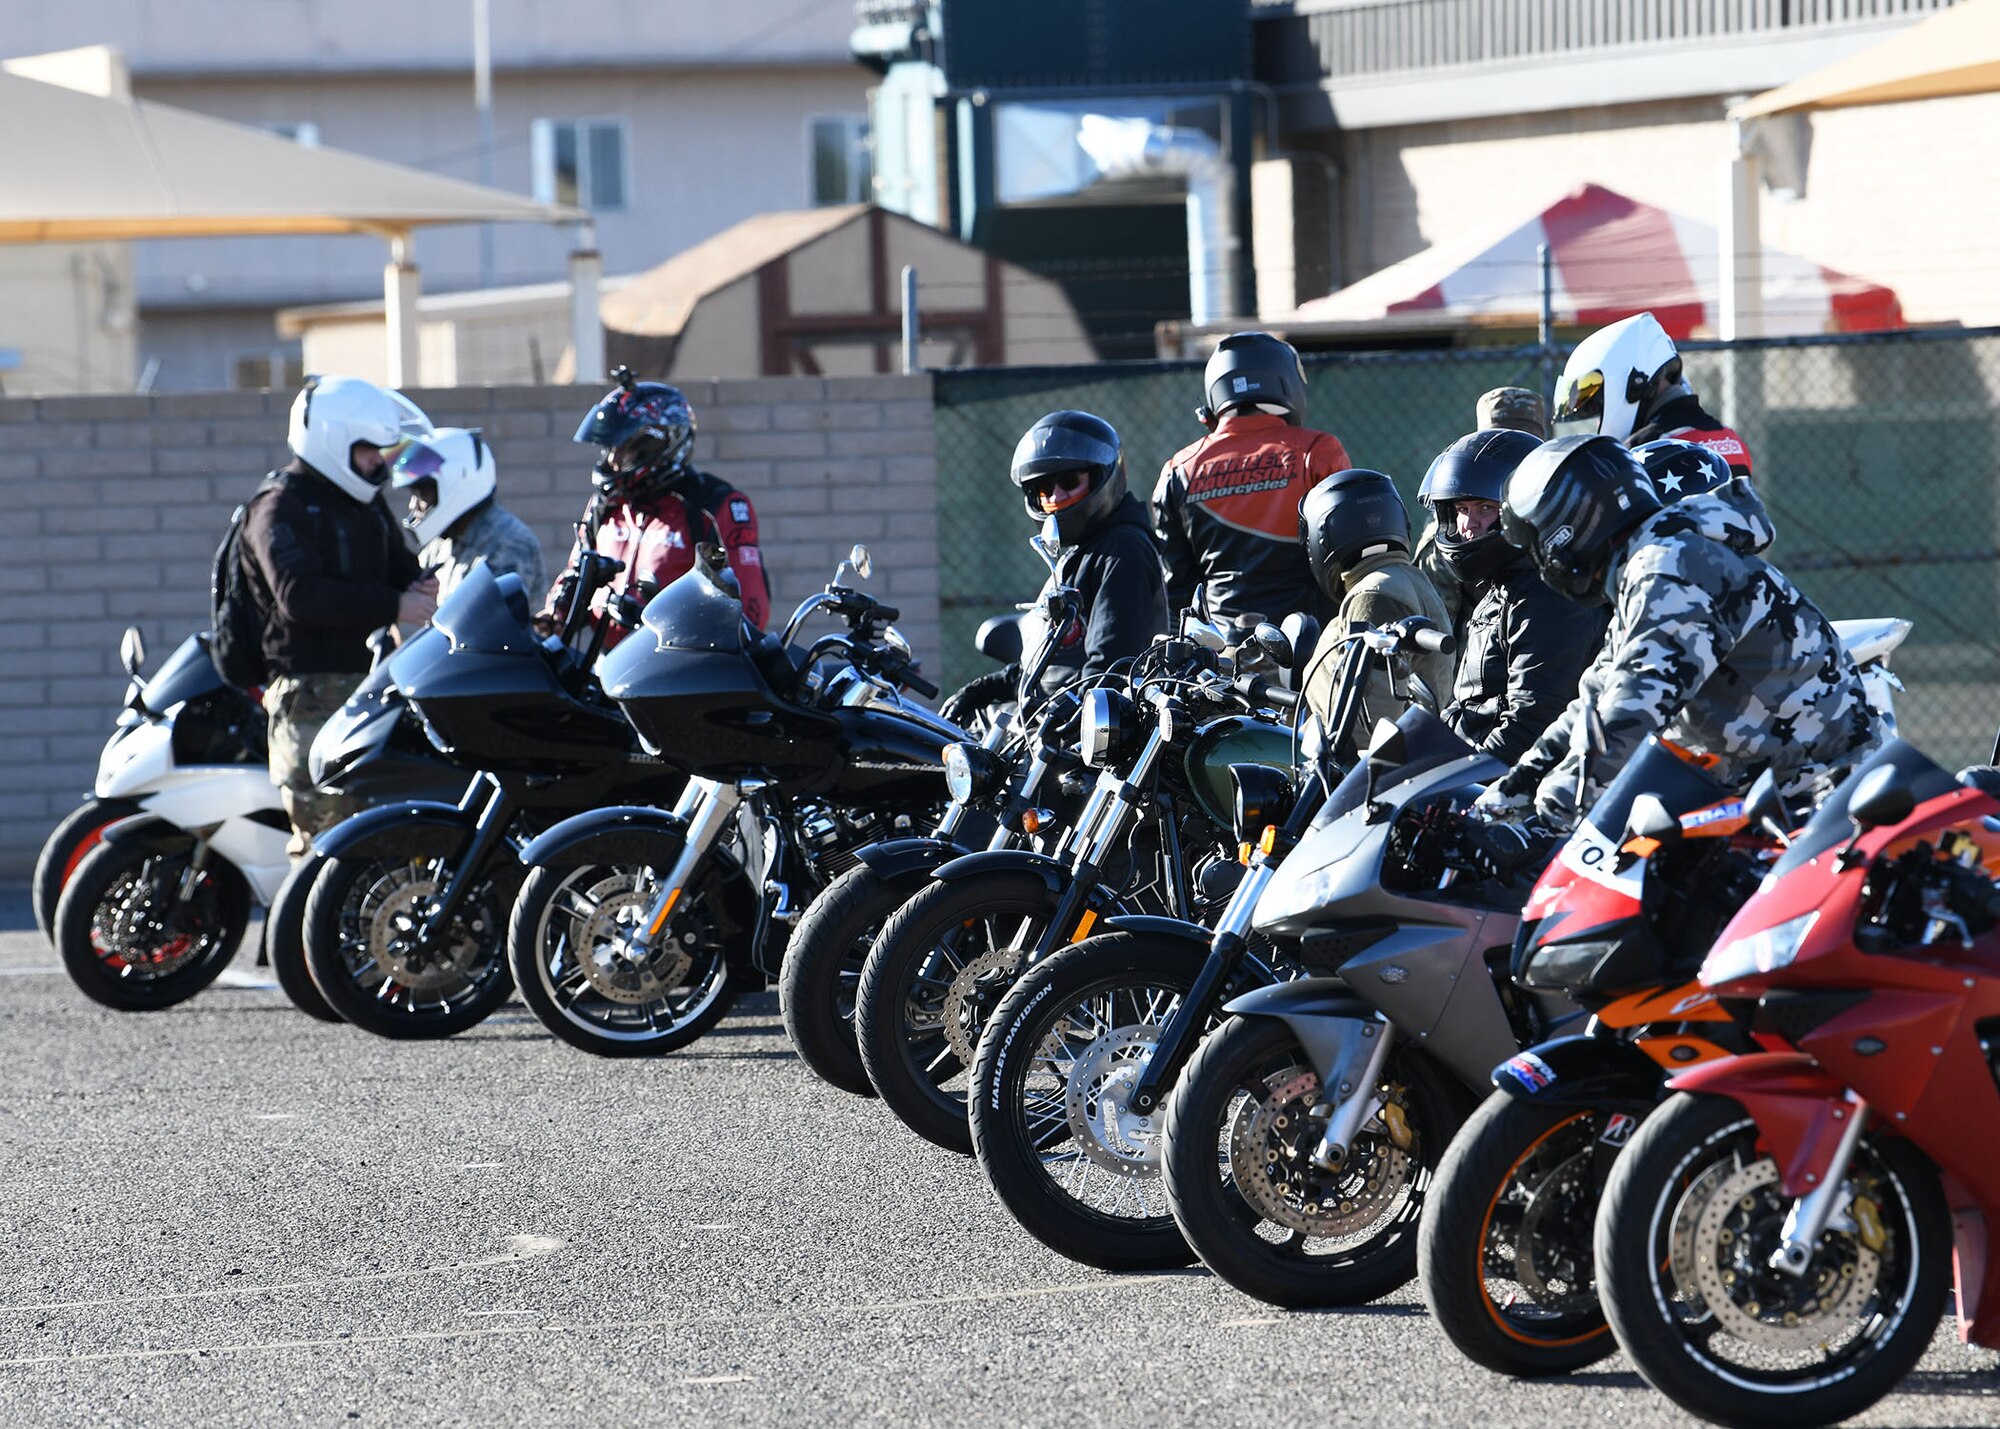 Members of the 944th Fighter Wing start their engines as they prepare to depart on a motorcycle safety program mentorship ride Nov. 8 at Luke Air Force Base, Ariz. The program provides members with their required motorcycle safety training certification.